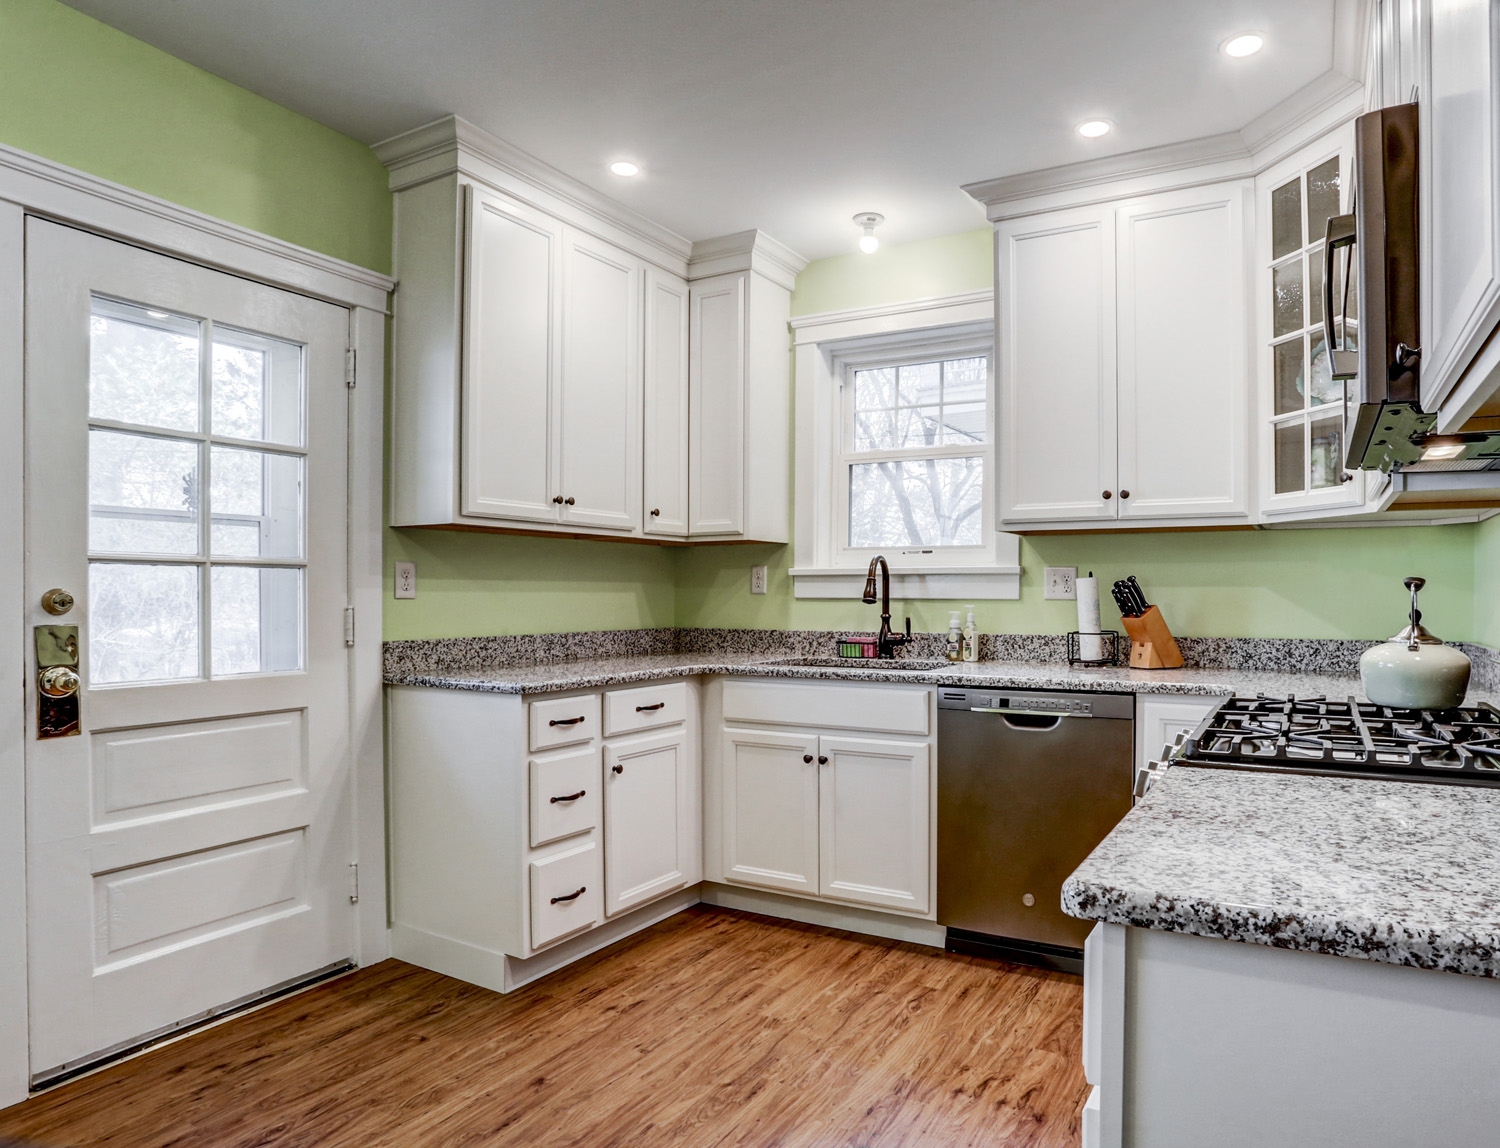 Lancaster City Kitchen Remodel with recessed lights and granite countertop